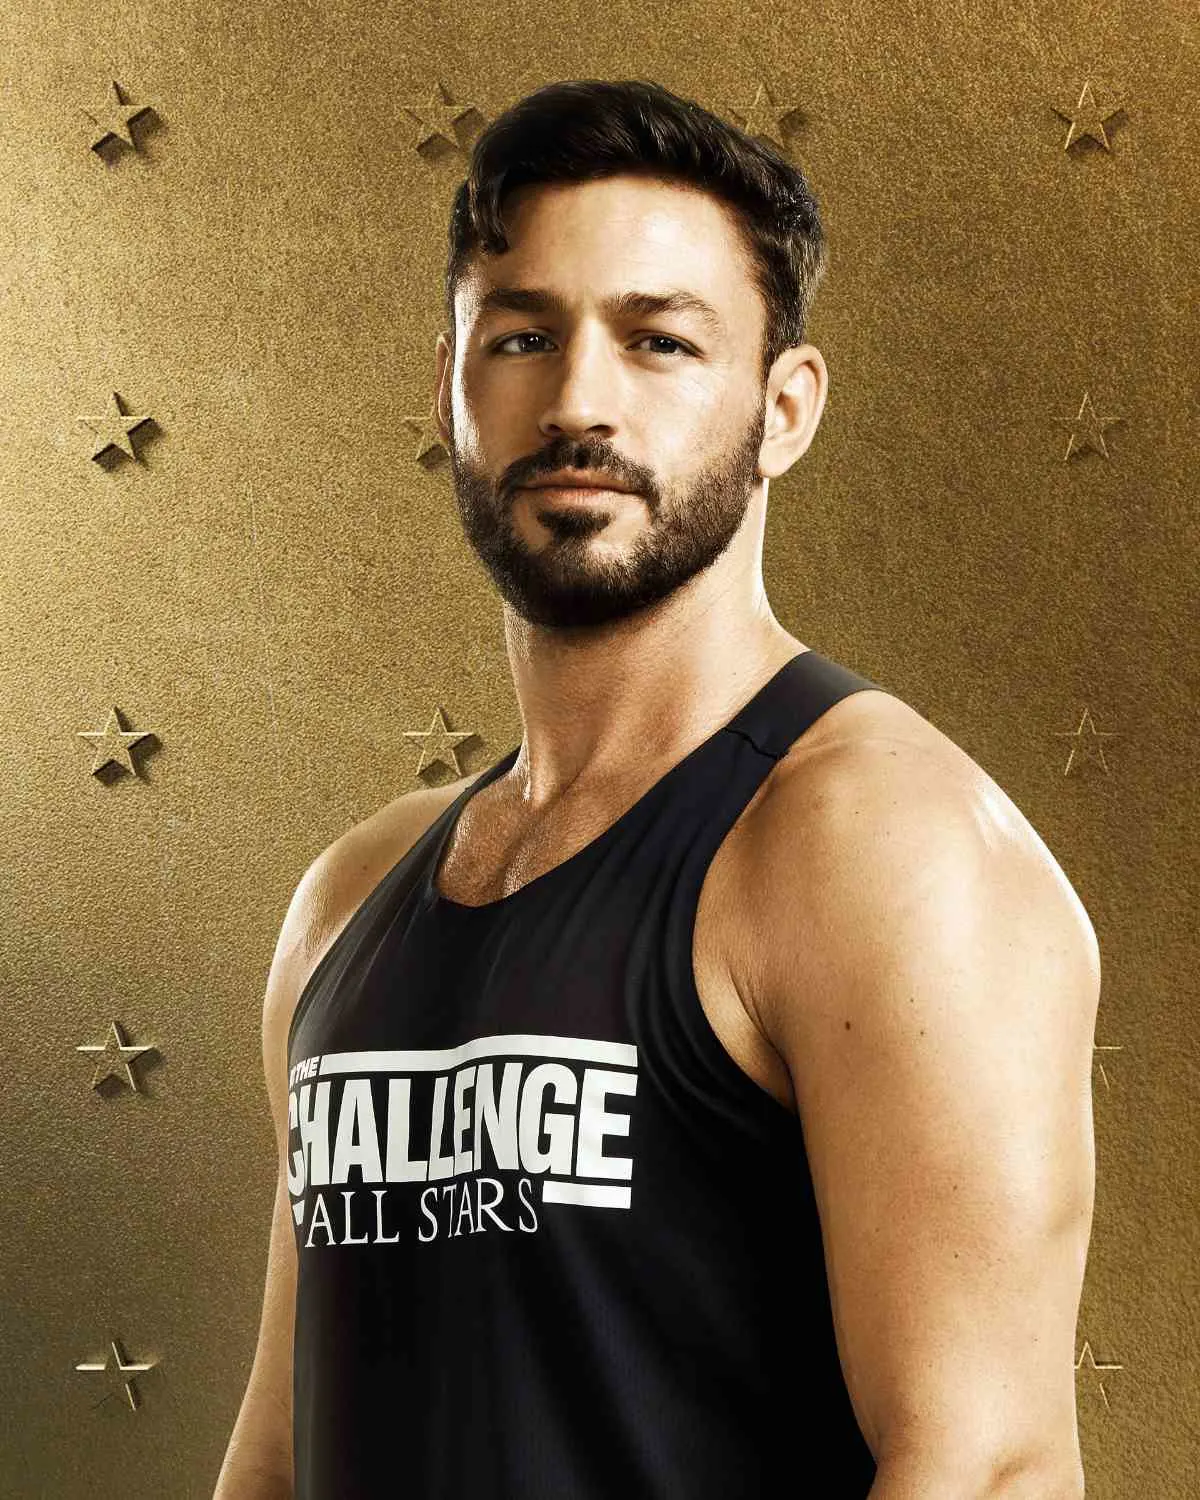 Tony Raines from The Challenge: All Stars